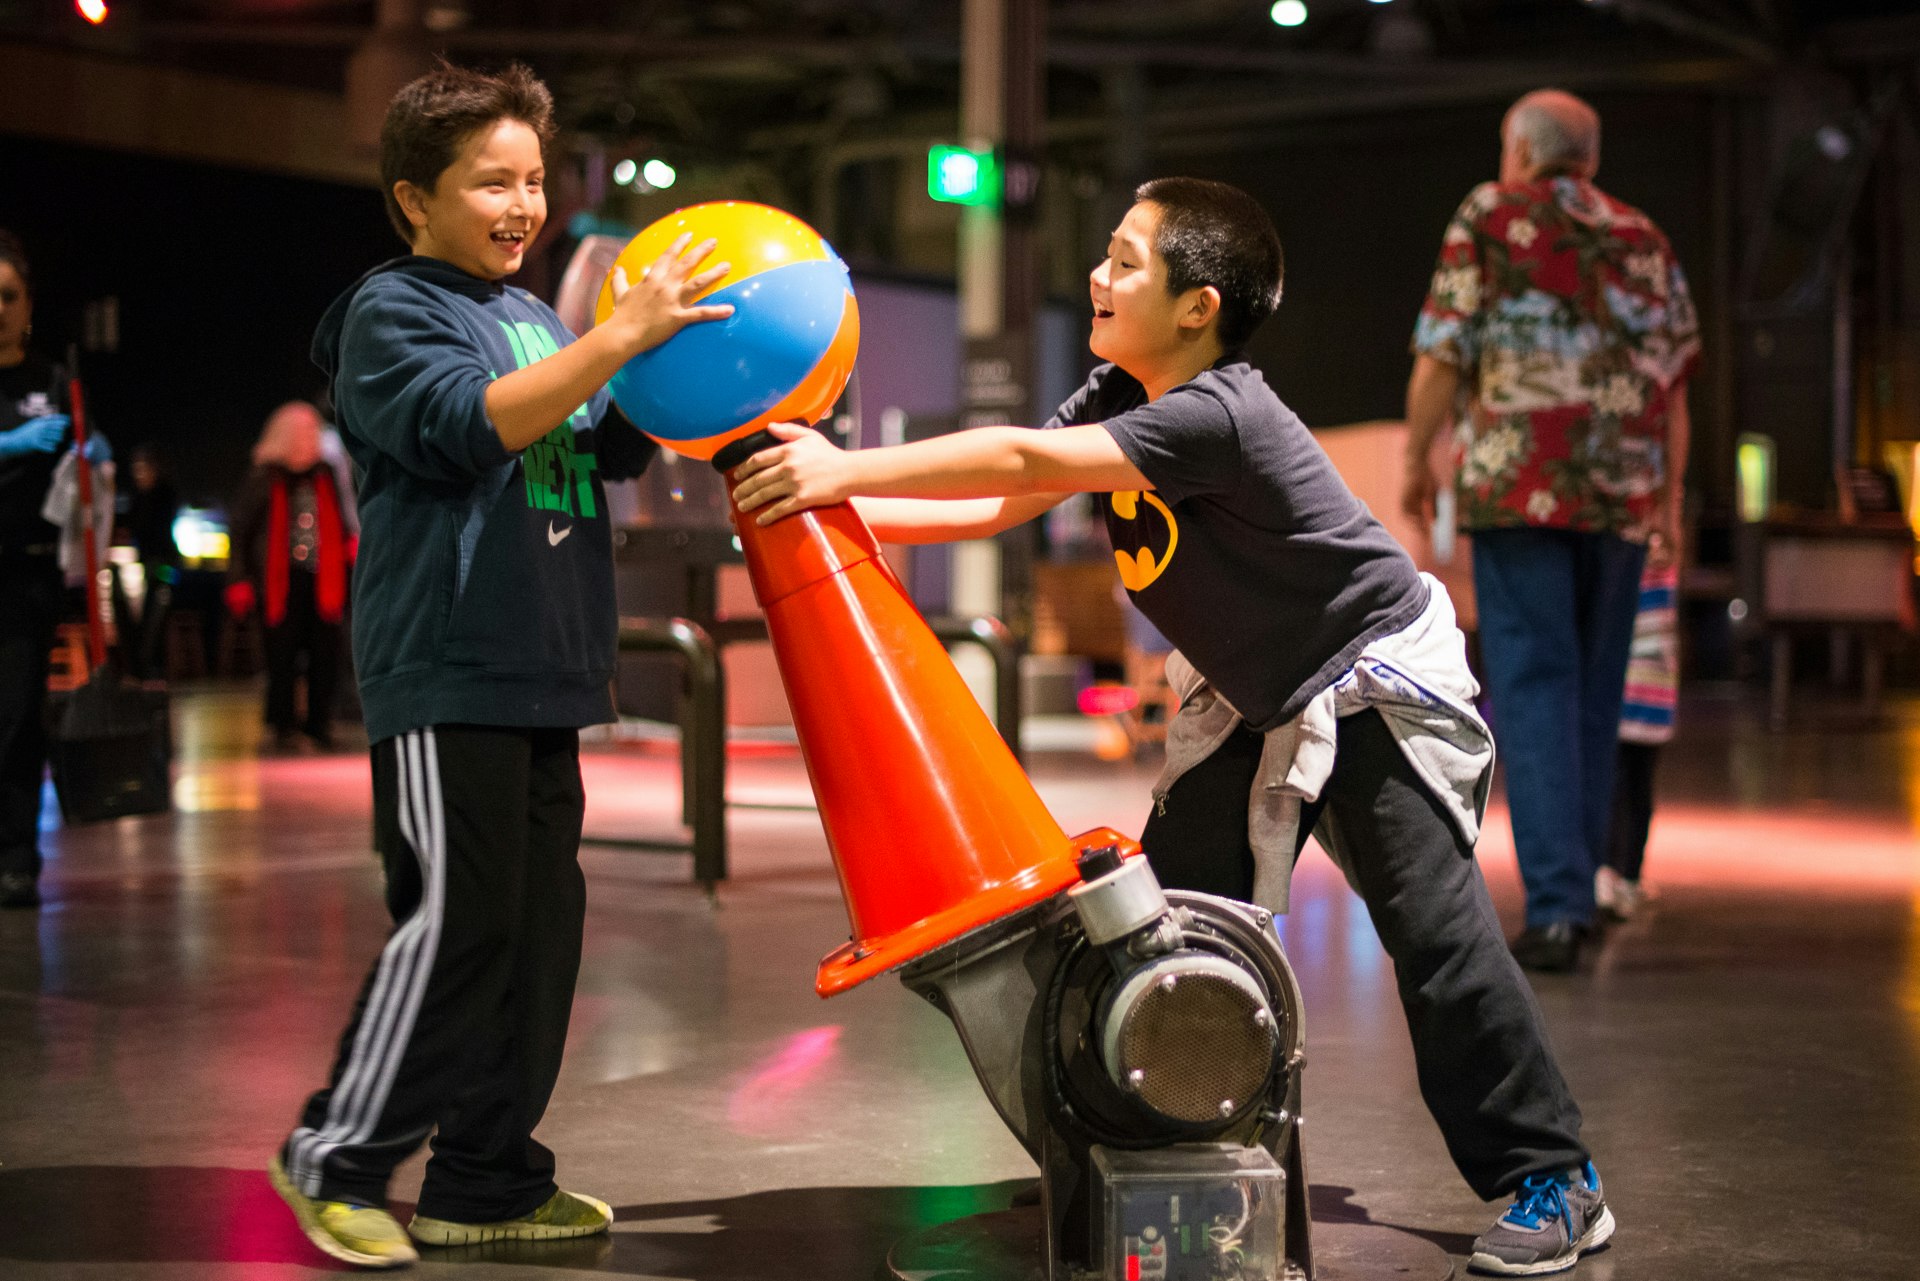 Two pre-teen boys are laughing as they hold an inflatable beach ball against an orange cone-like structure